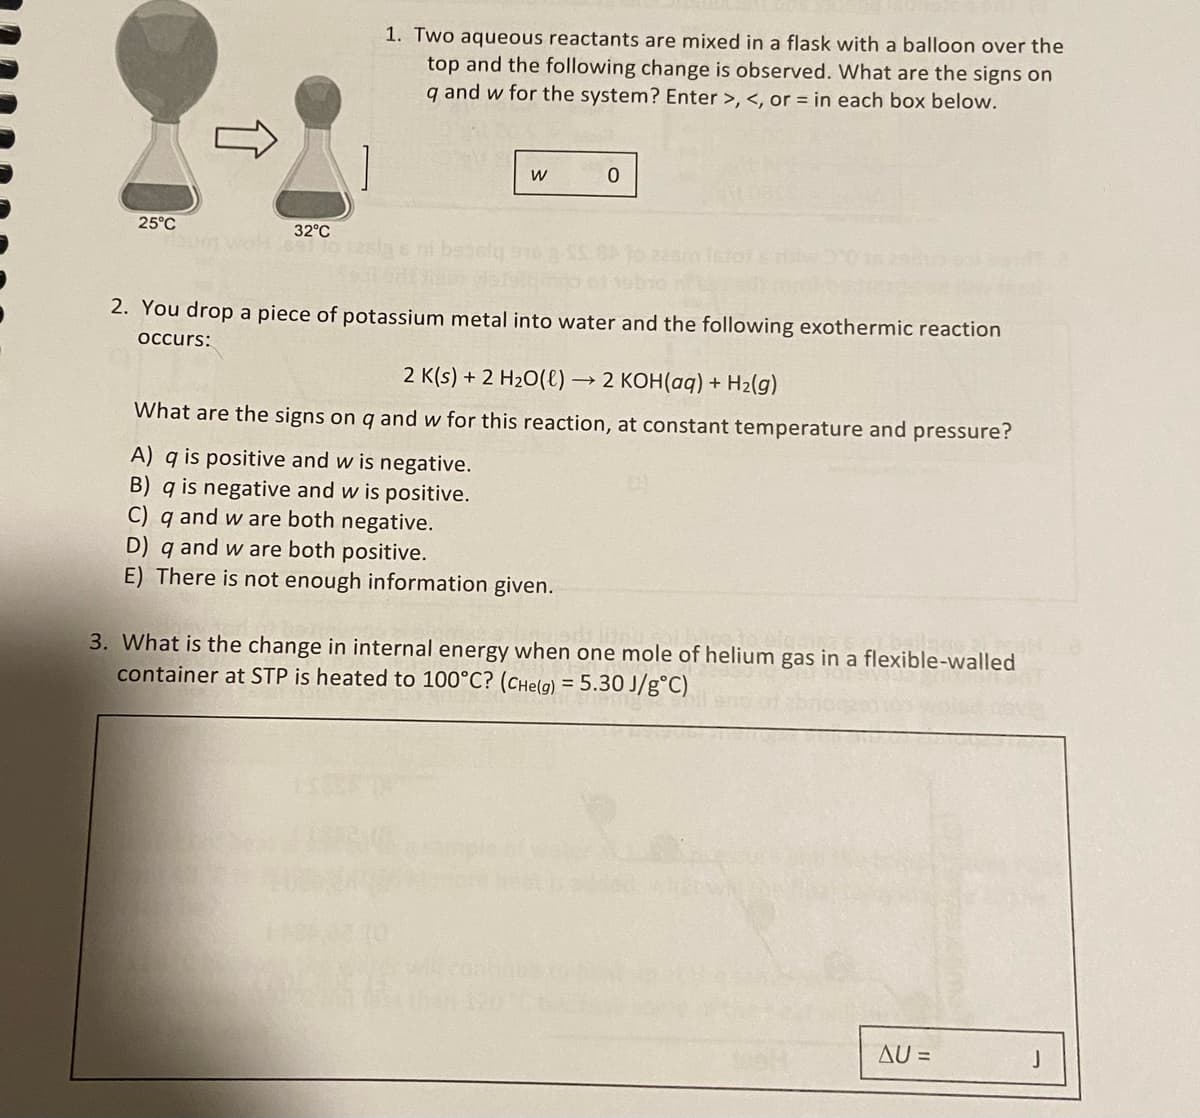 25°C
32°C
bum wohl 891 10 228
1. Two aqueous reactants are mixed in a flask with a balloon over the
top and the following change is observed. What are the signs on
q and w for the system? Enter >, <, or in each box below.
W
0
2. You drop a piece of potassium metal into water and the following exothermic reaction
occurs:
2 K(s) + 2 H₂O(l) → 2 KOH(aq) + H₂(g)
What are the signs on q and w for this reaction, at constant temperature and pressure?
A) q is positive and w is negative.
B) q is negative and w is positive.
C) q and w are both negative.
D) q and w are both positive.
E) There is not enough information given.
3. What is the change in internal energy when one mole of helium gas in a flexible-walled
container at STP is heated to 100°C? (CHe(g) = 5.30 J/g°C)
AU =